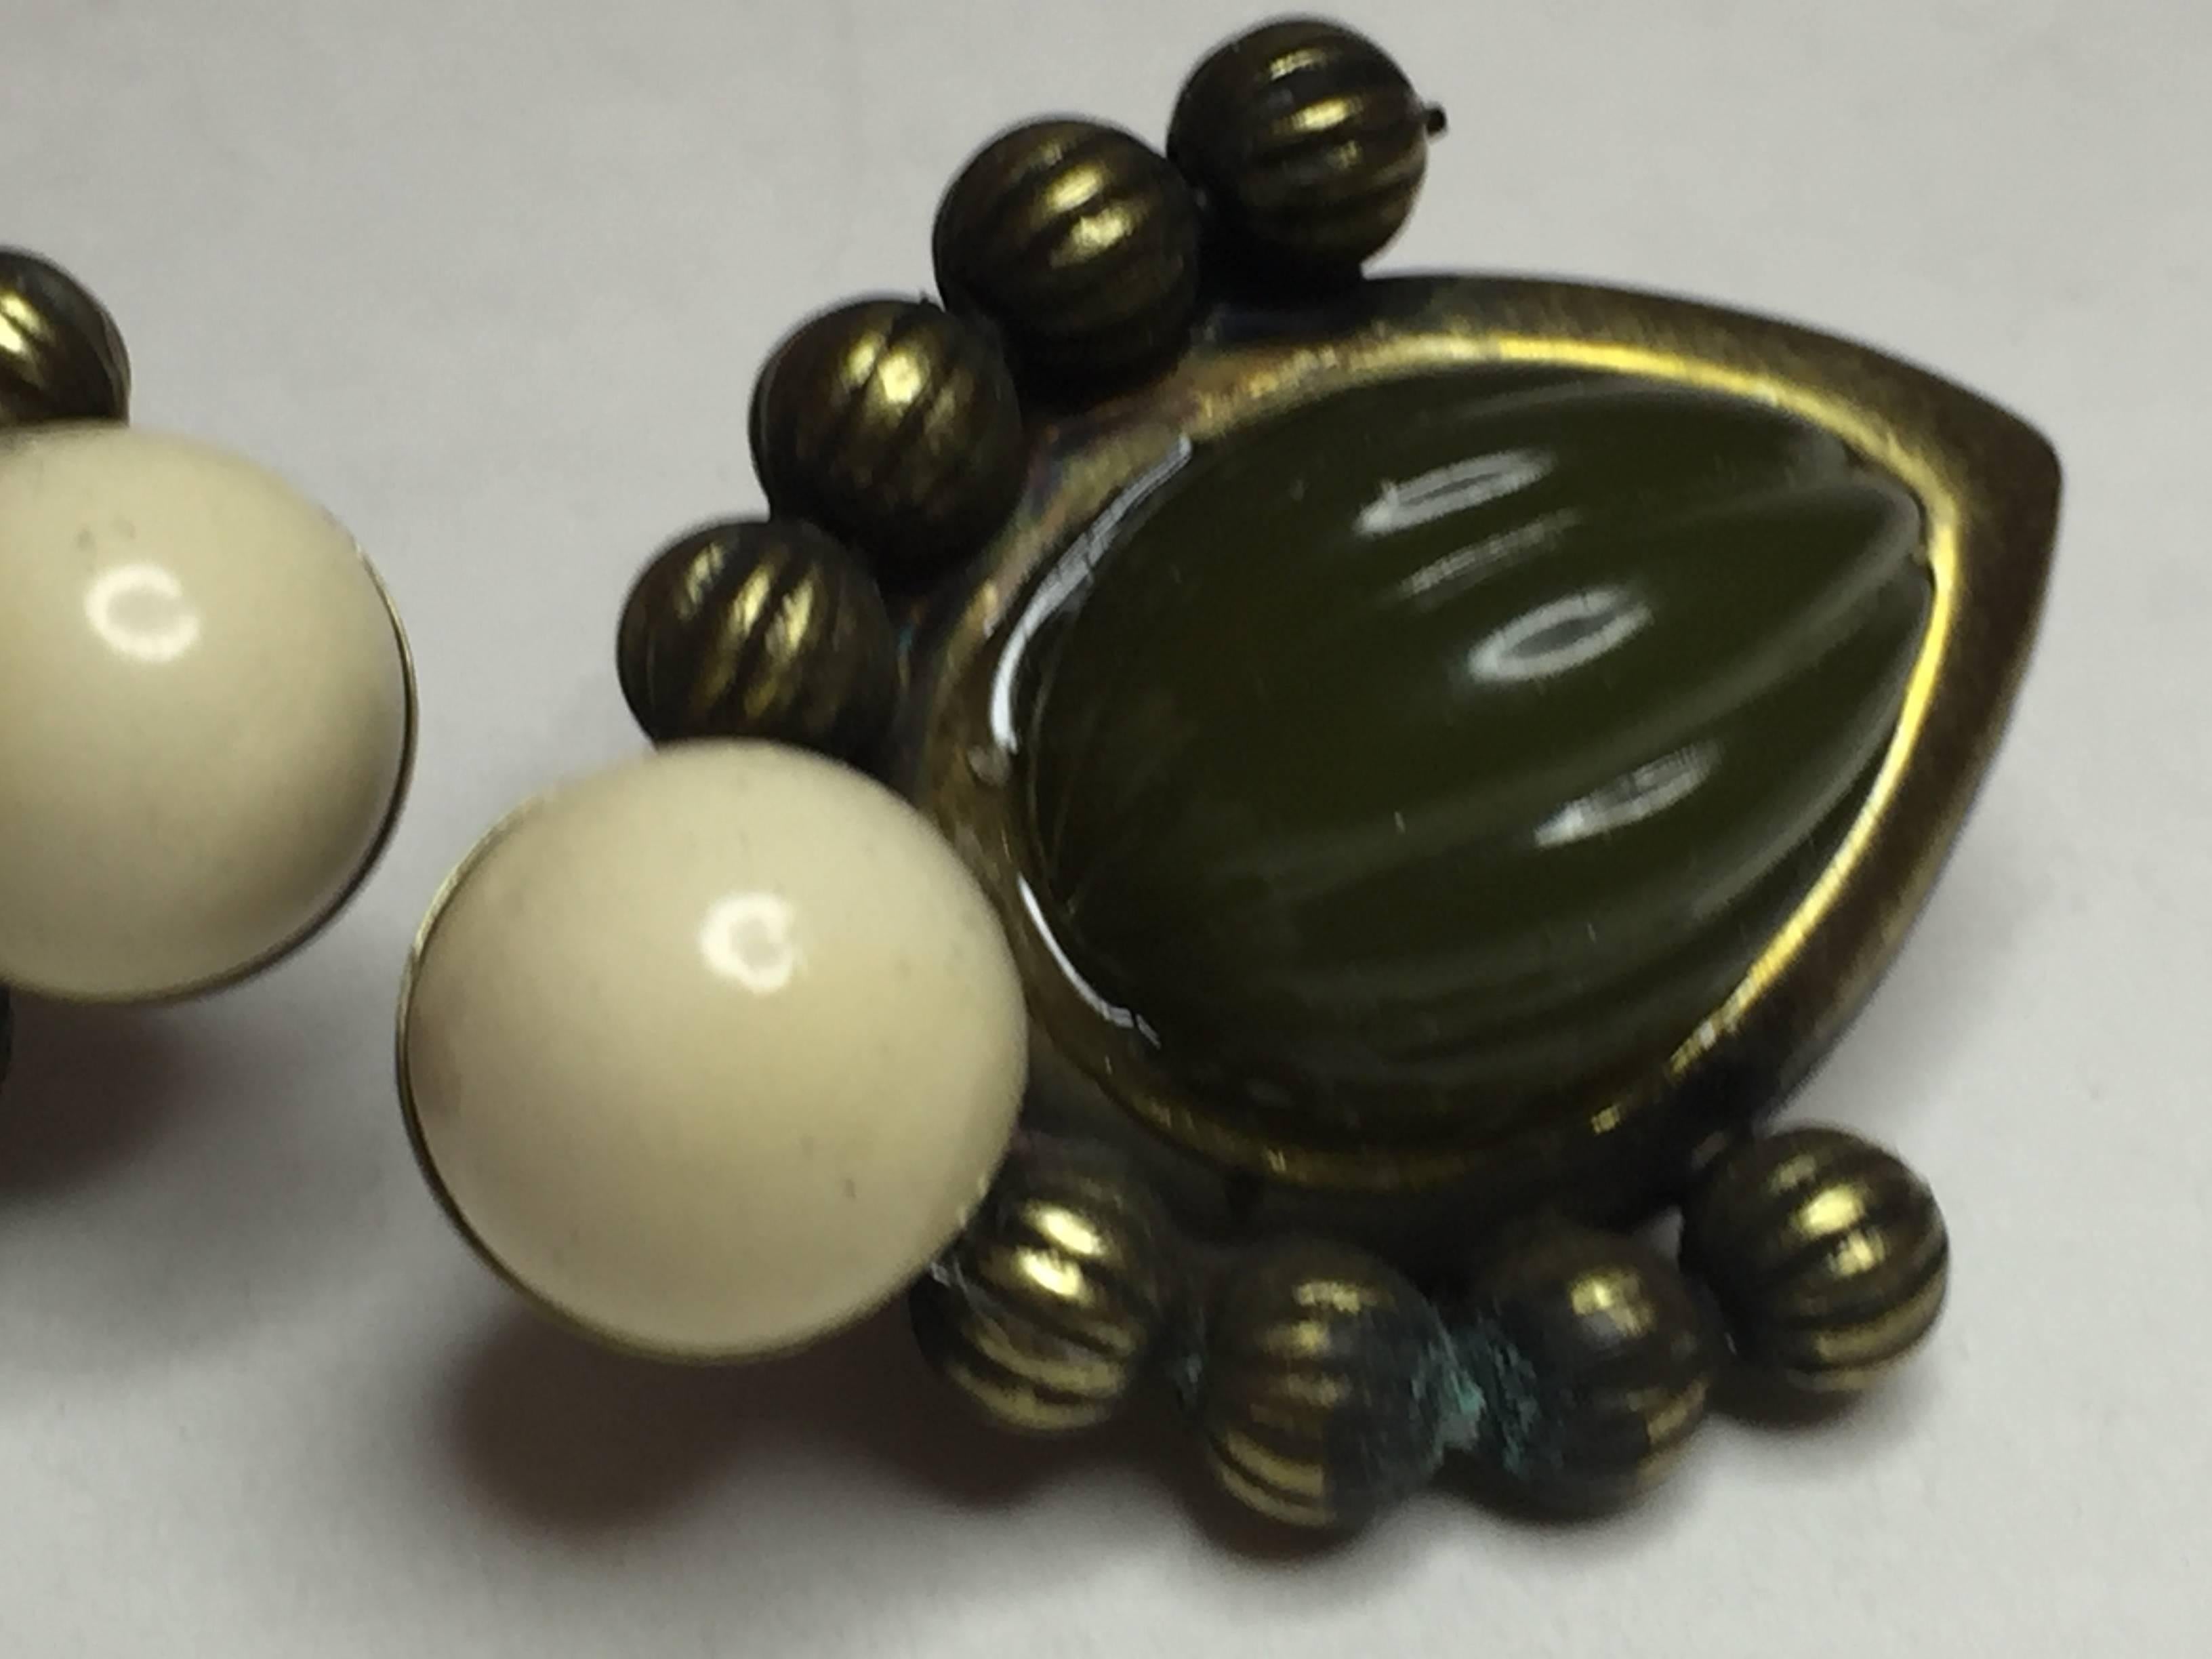 This classic resin and bead VRBA earring of manufacture and design in the past 10 years, is ressemblant of a green faux jade carved bakelite earring set in an antiqued gold  ball detailed setting. A cream celluloid like resin bead forms the terminus